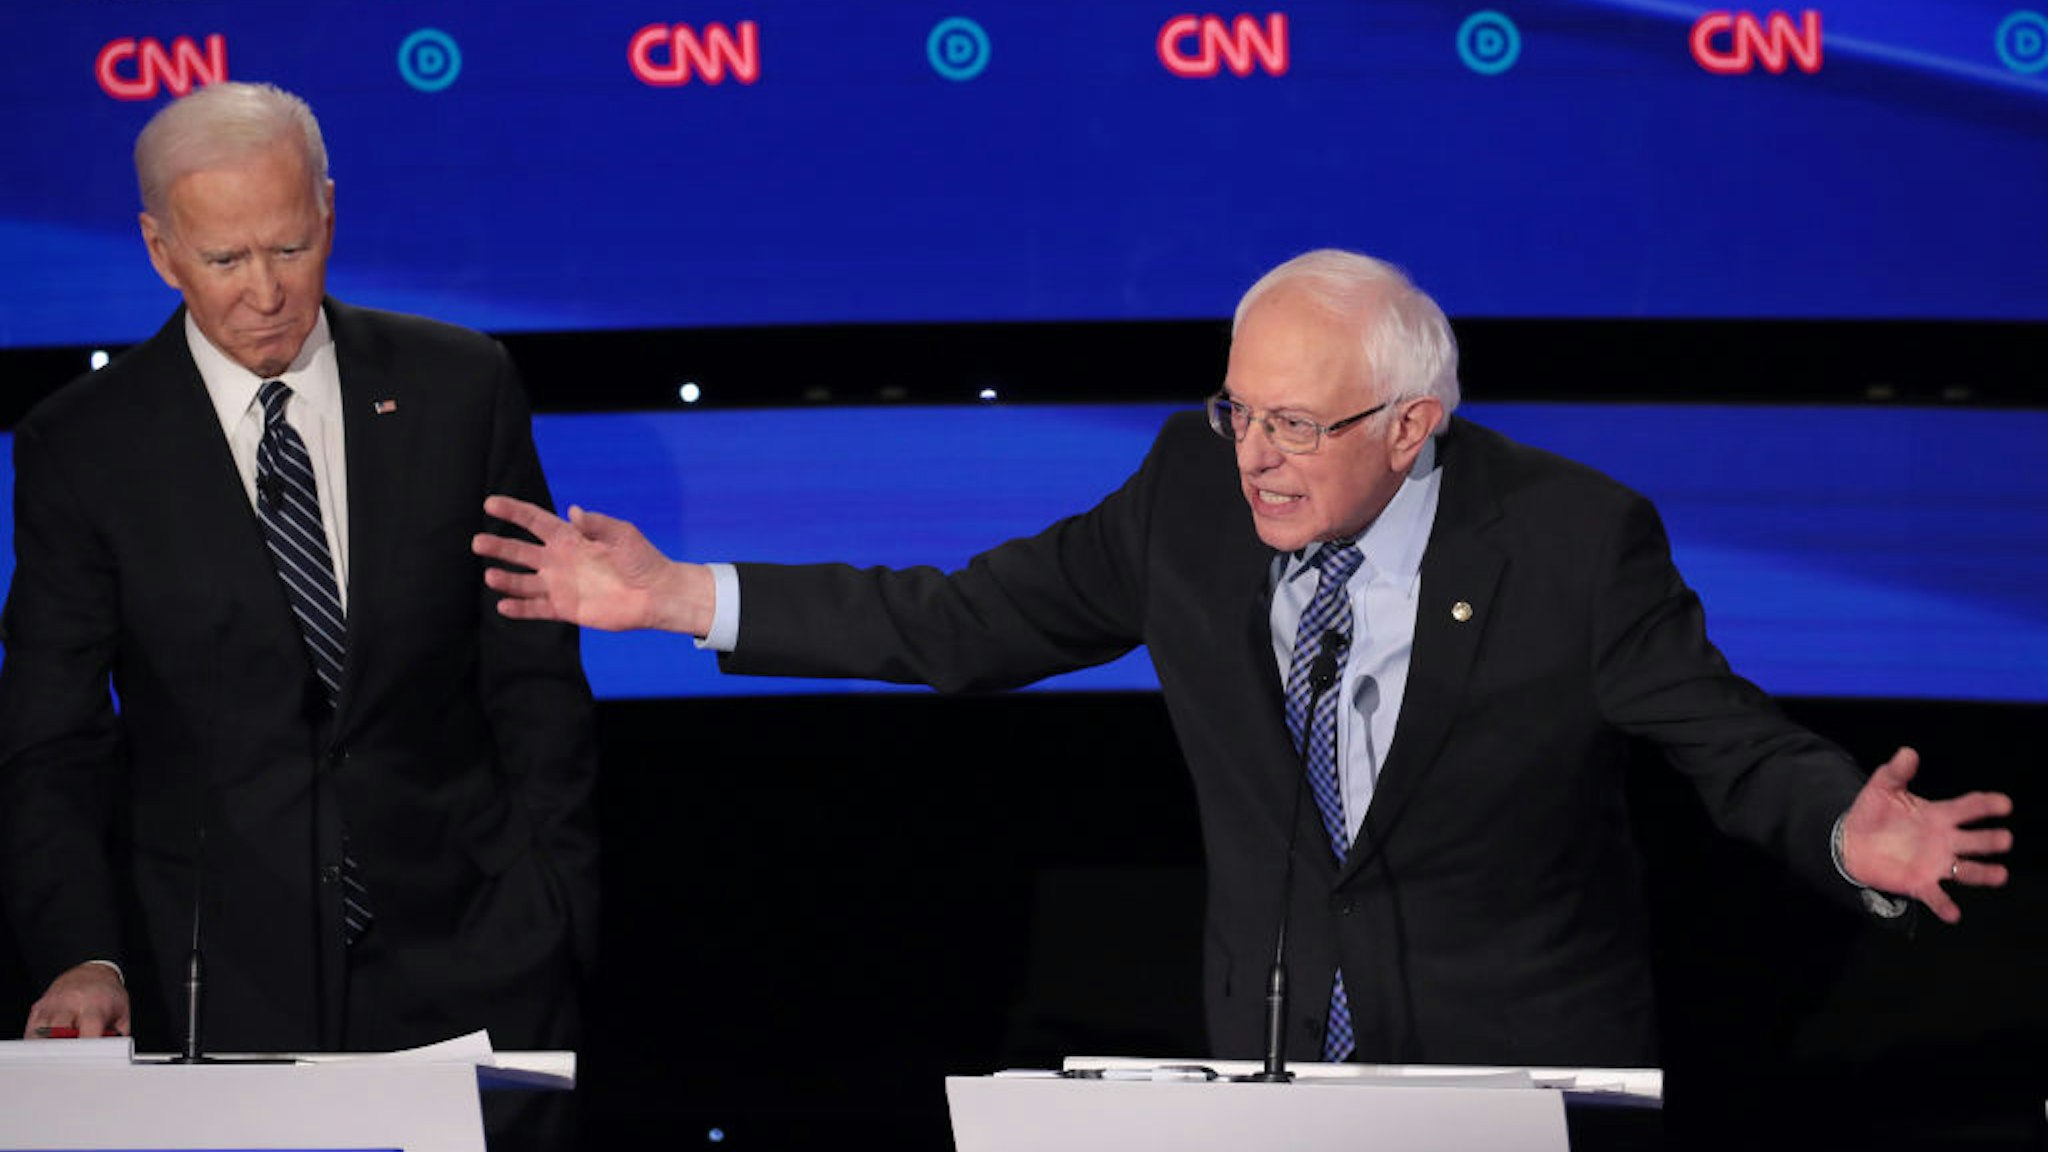 Former Vice President Joe Biden (L) listens as Sen. Bernie Sanders (I-VT) makes a point during the Democratic presidential primary debate at Drake University on January 14, 2020 in Des Moines, Iowa.